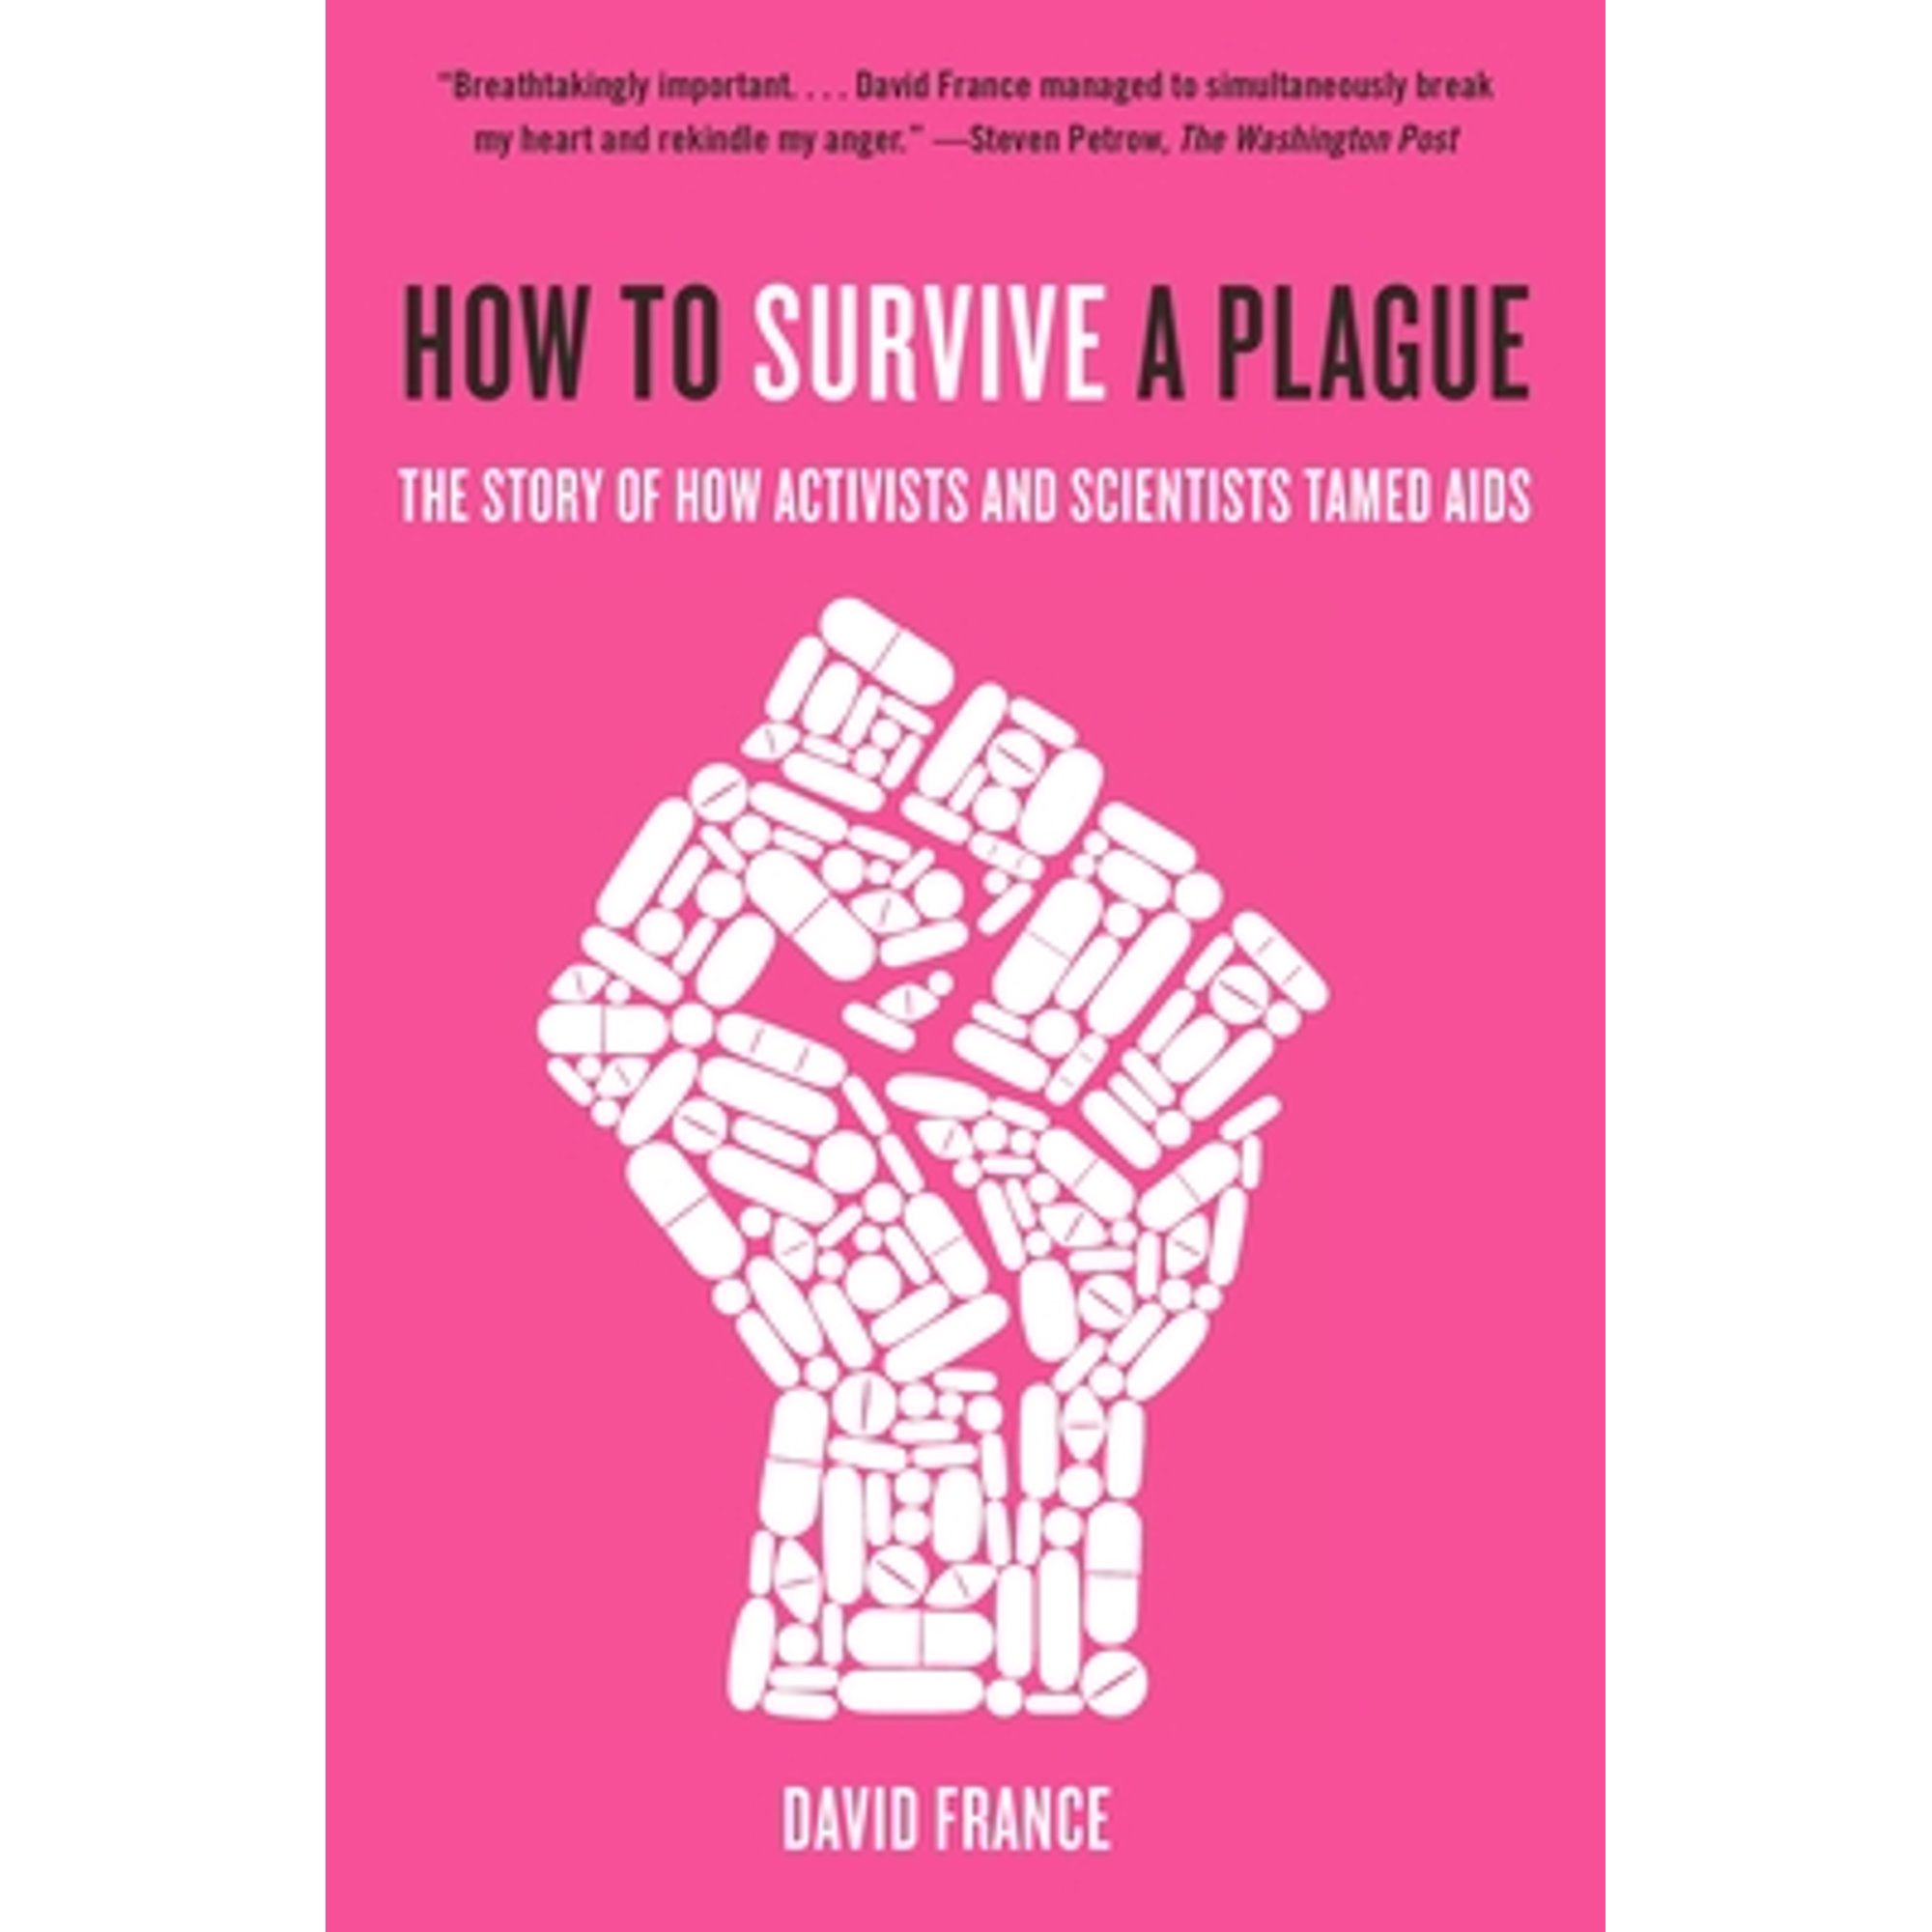 How to Survive a Plague: The Story of How Activists and Scientists Tamed AIDS (Paperback) - image 1 of 1